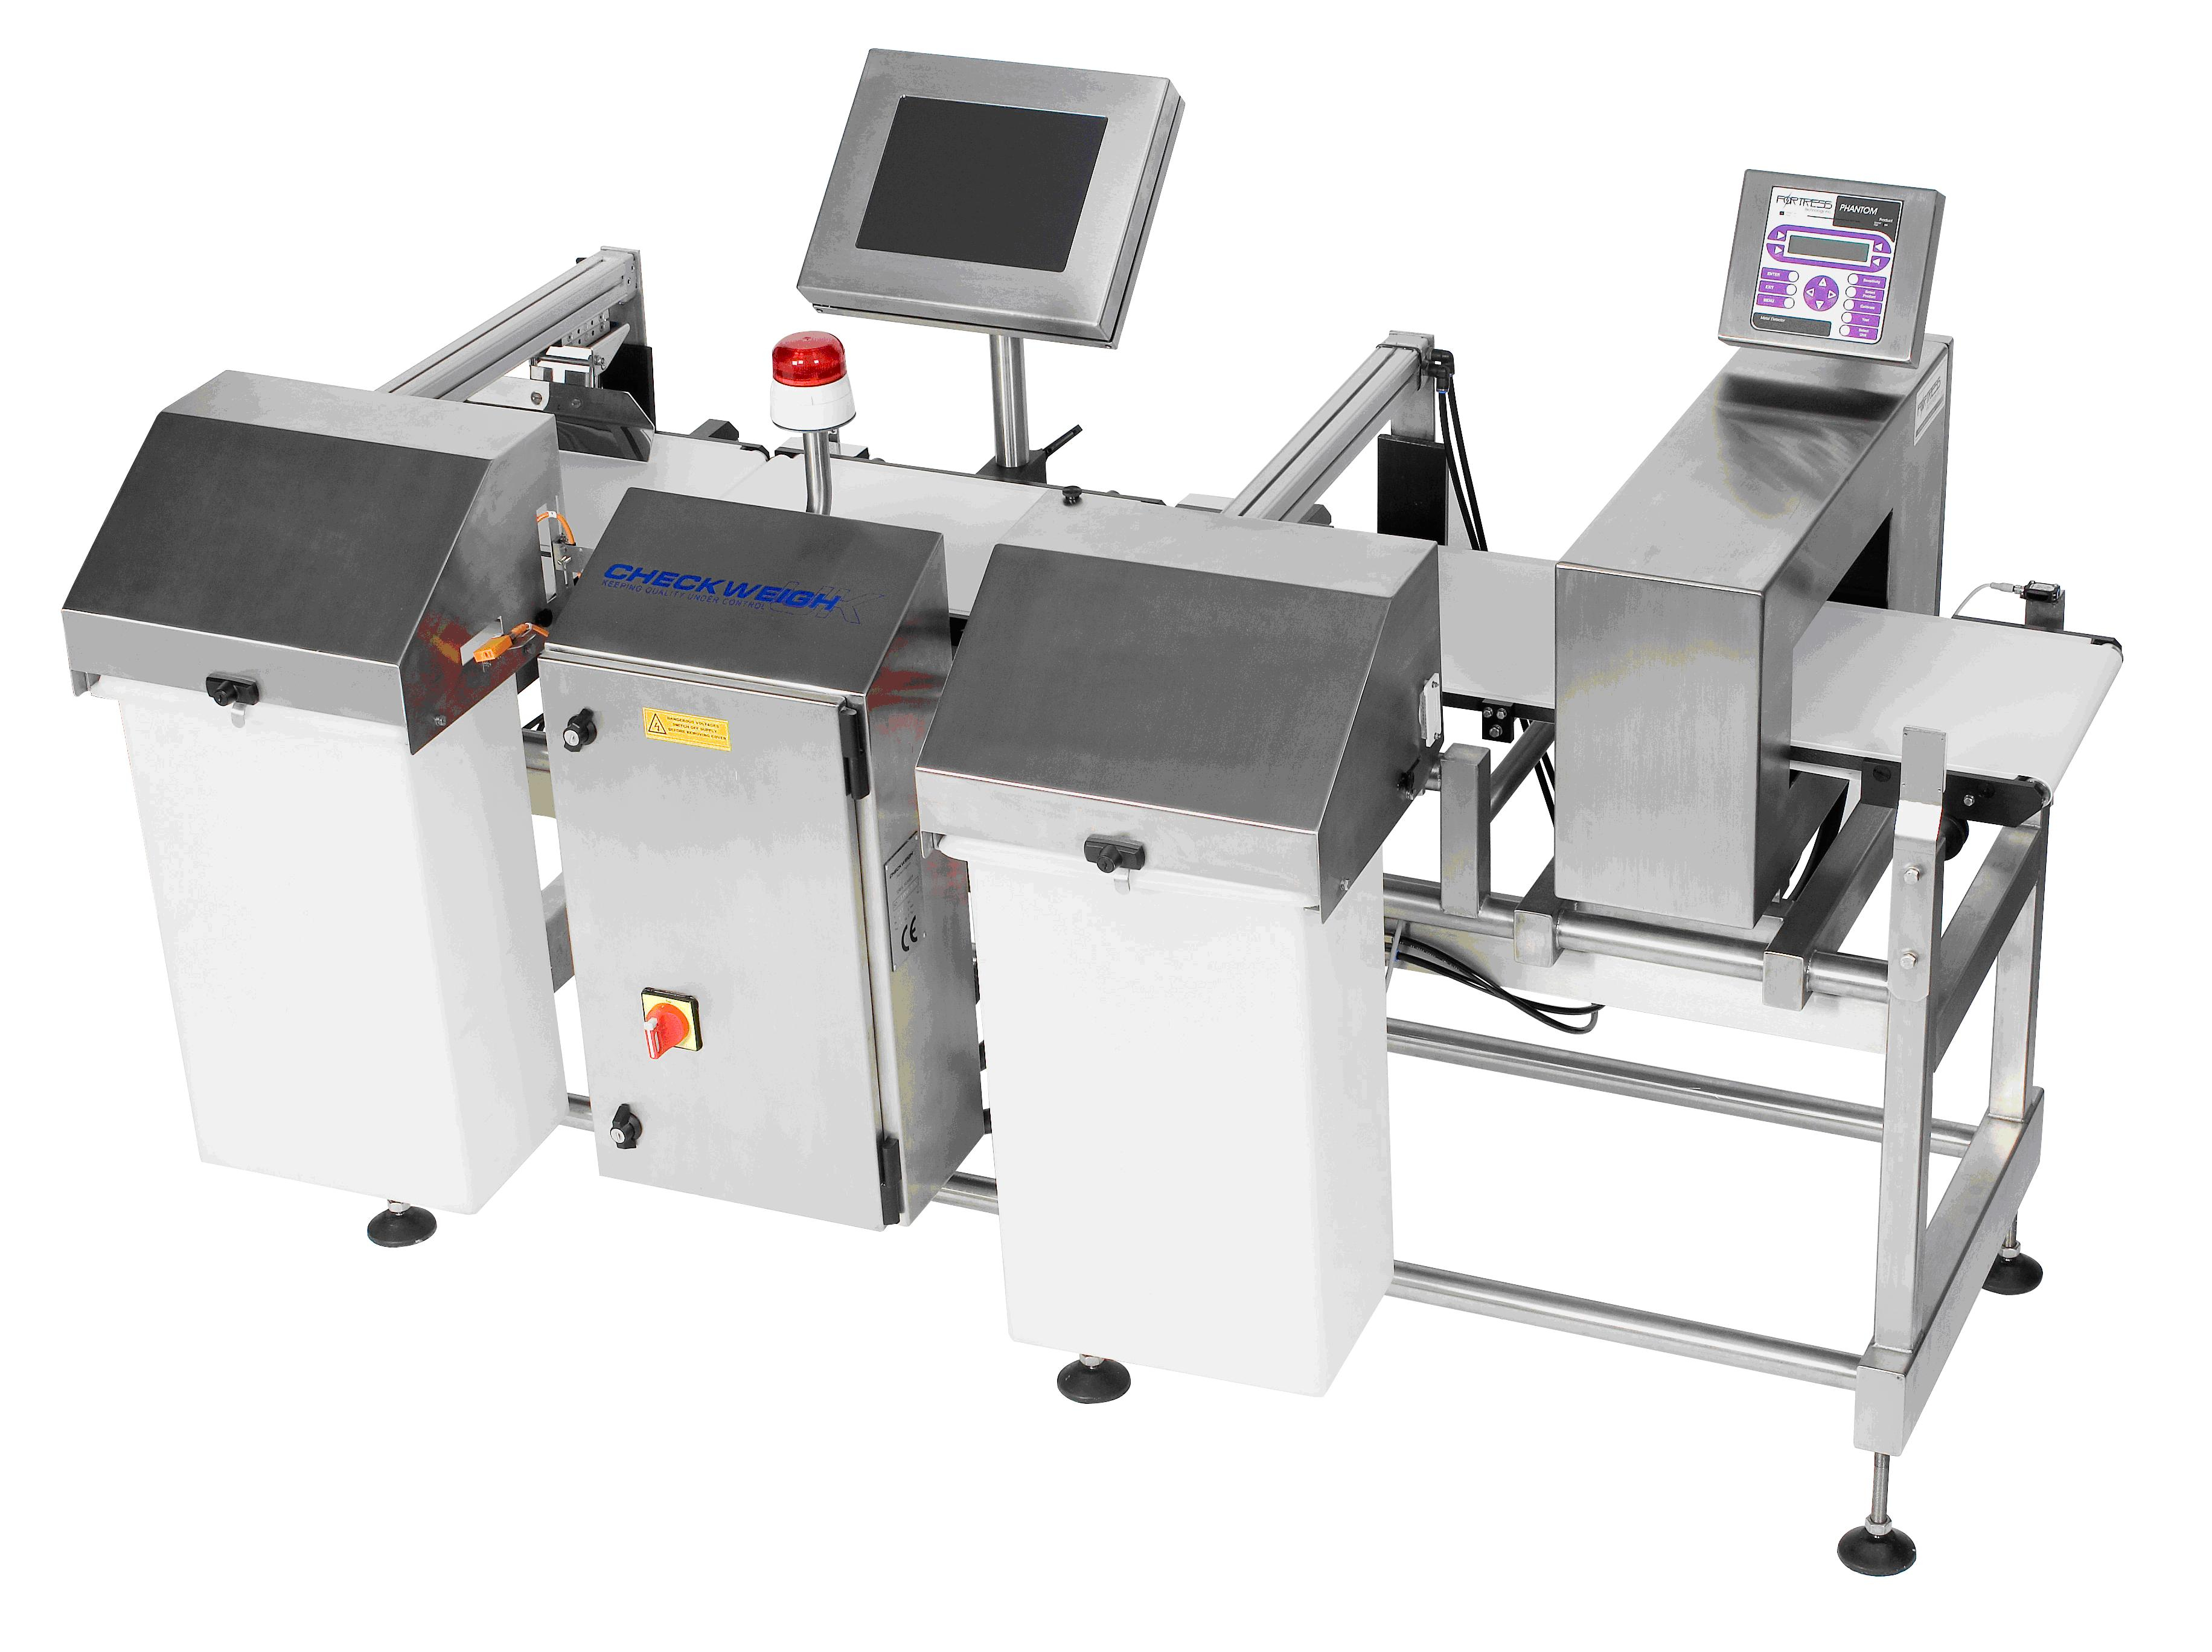 Fortress checkweigher and Phantom metal detector combination â€“ Fortress continues to focus on ease of use for operating and maintenance staff